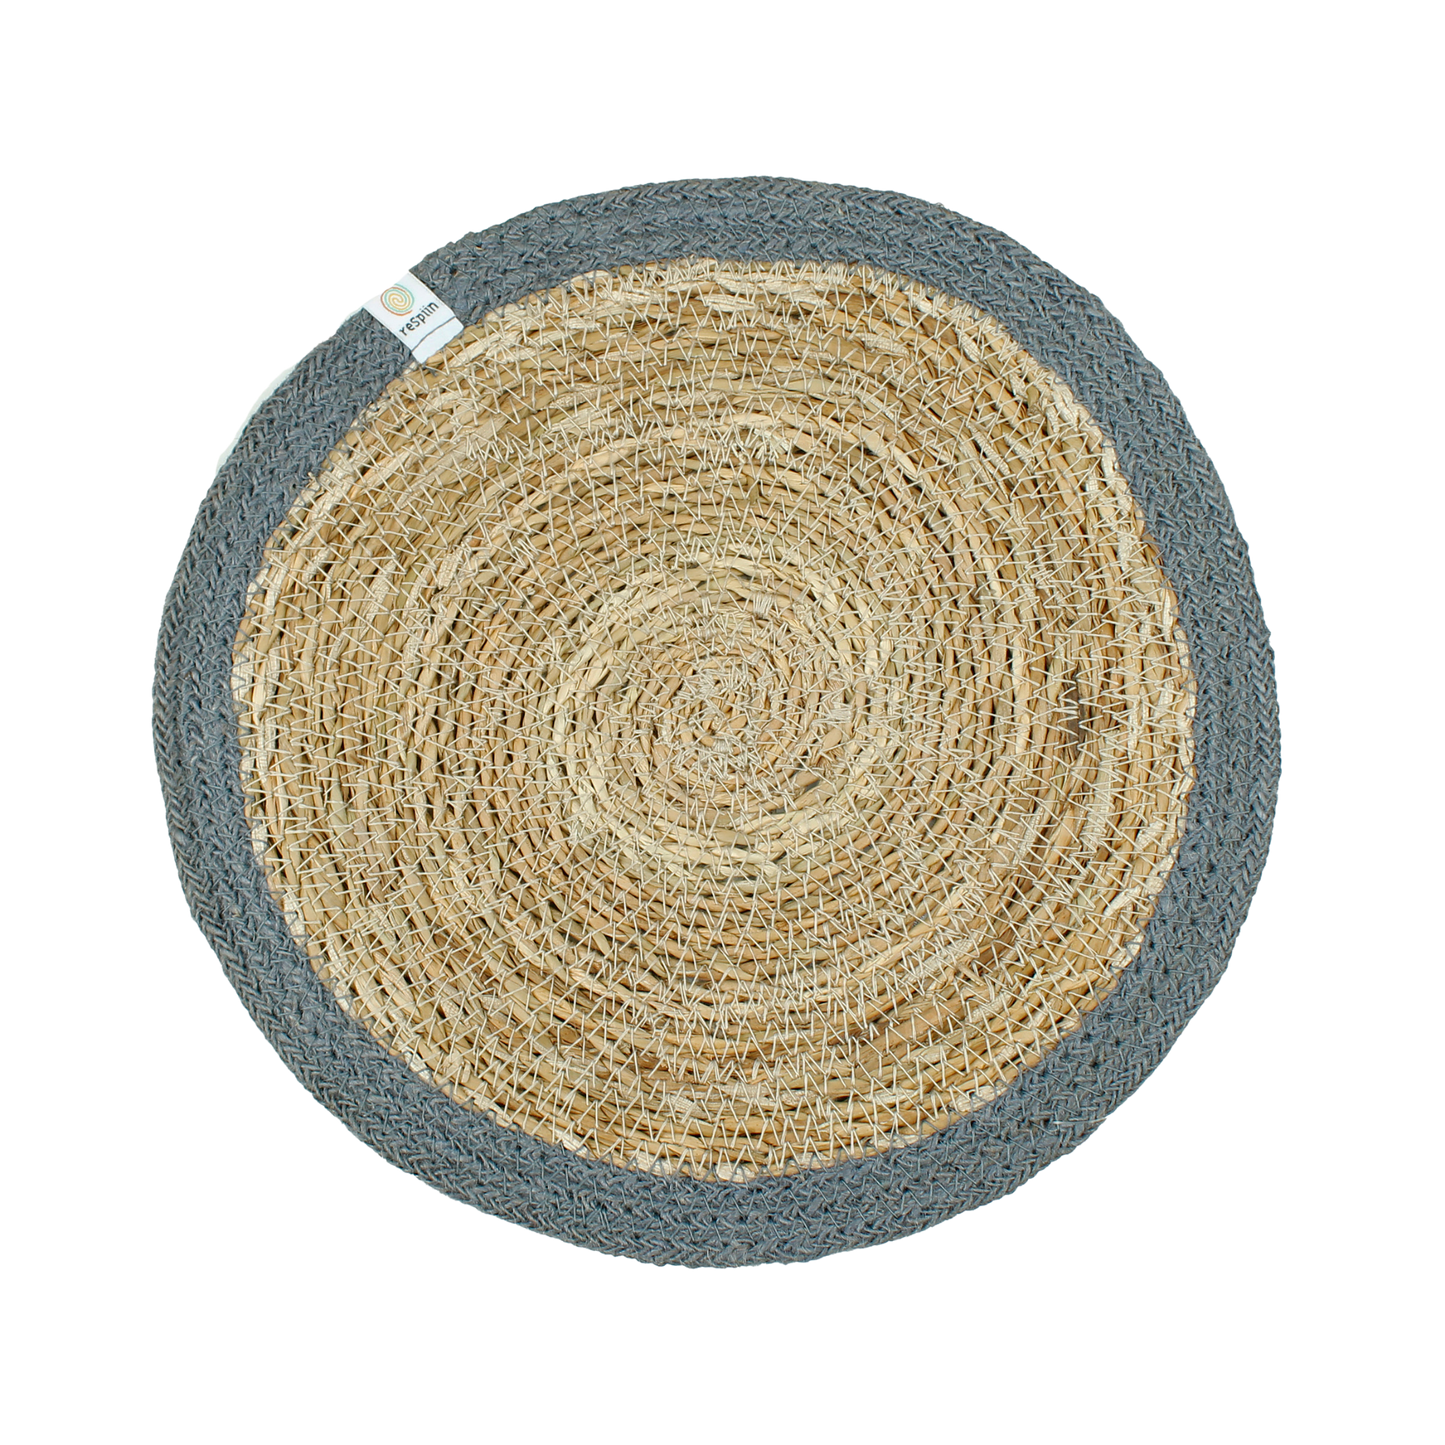 Woven Seagrass + Jute Tablemat - NATURAL/GREY